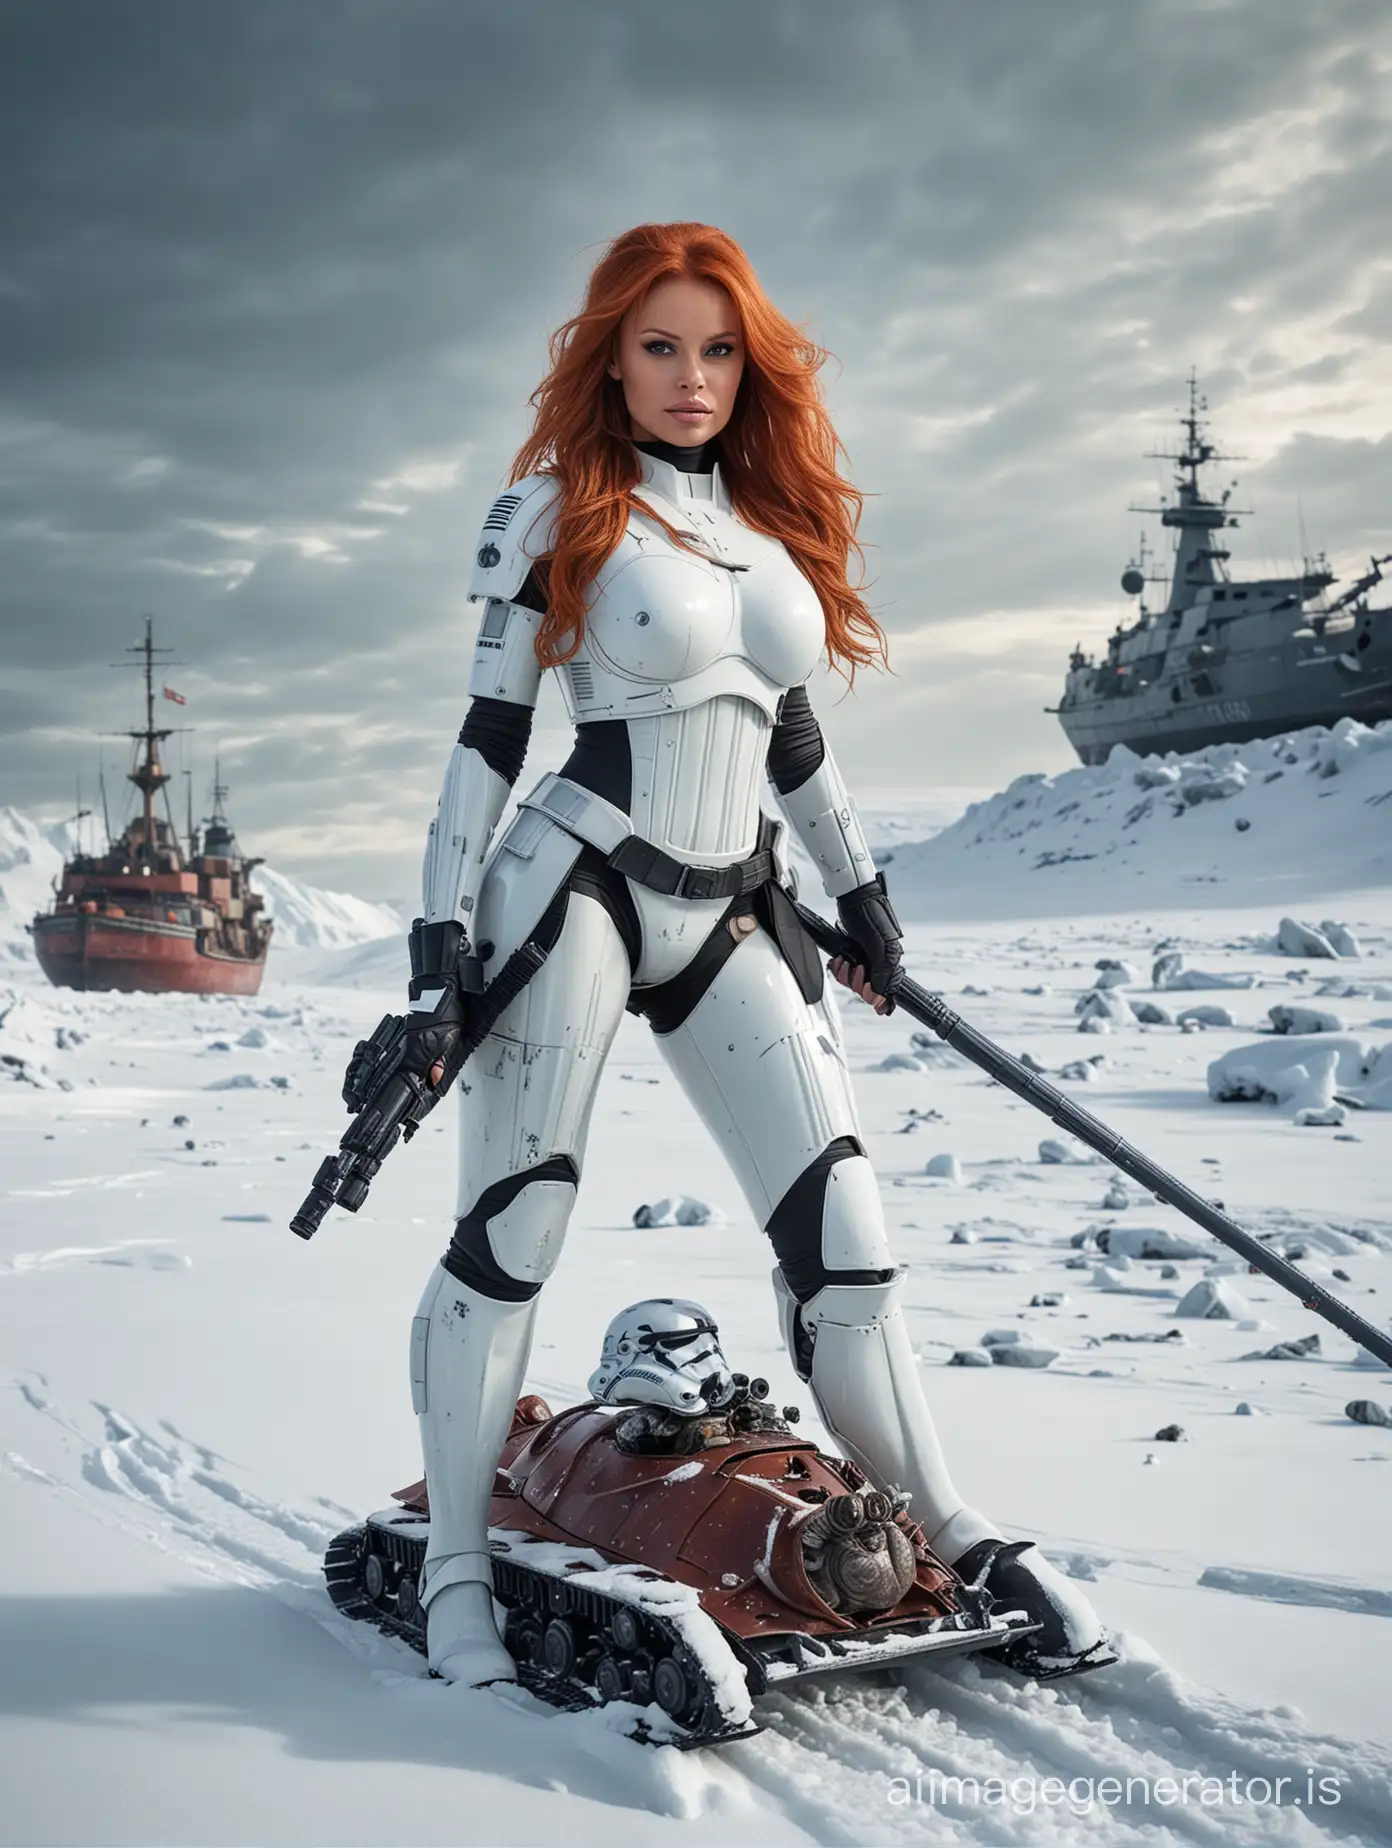 Young Pamela Anderson. full body woman riding on top of a sled pulled by snails. very long red hair. Stormtrooper armor, outfit, gear, helmet and light saber. Epic background battle with ships and troops. frozen arctic background